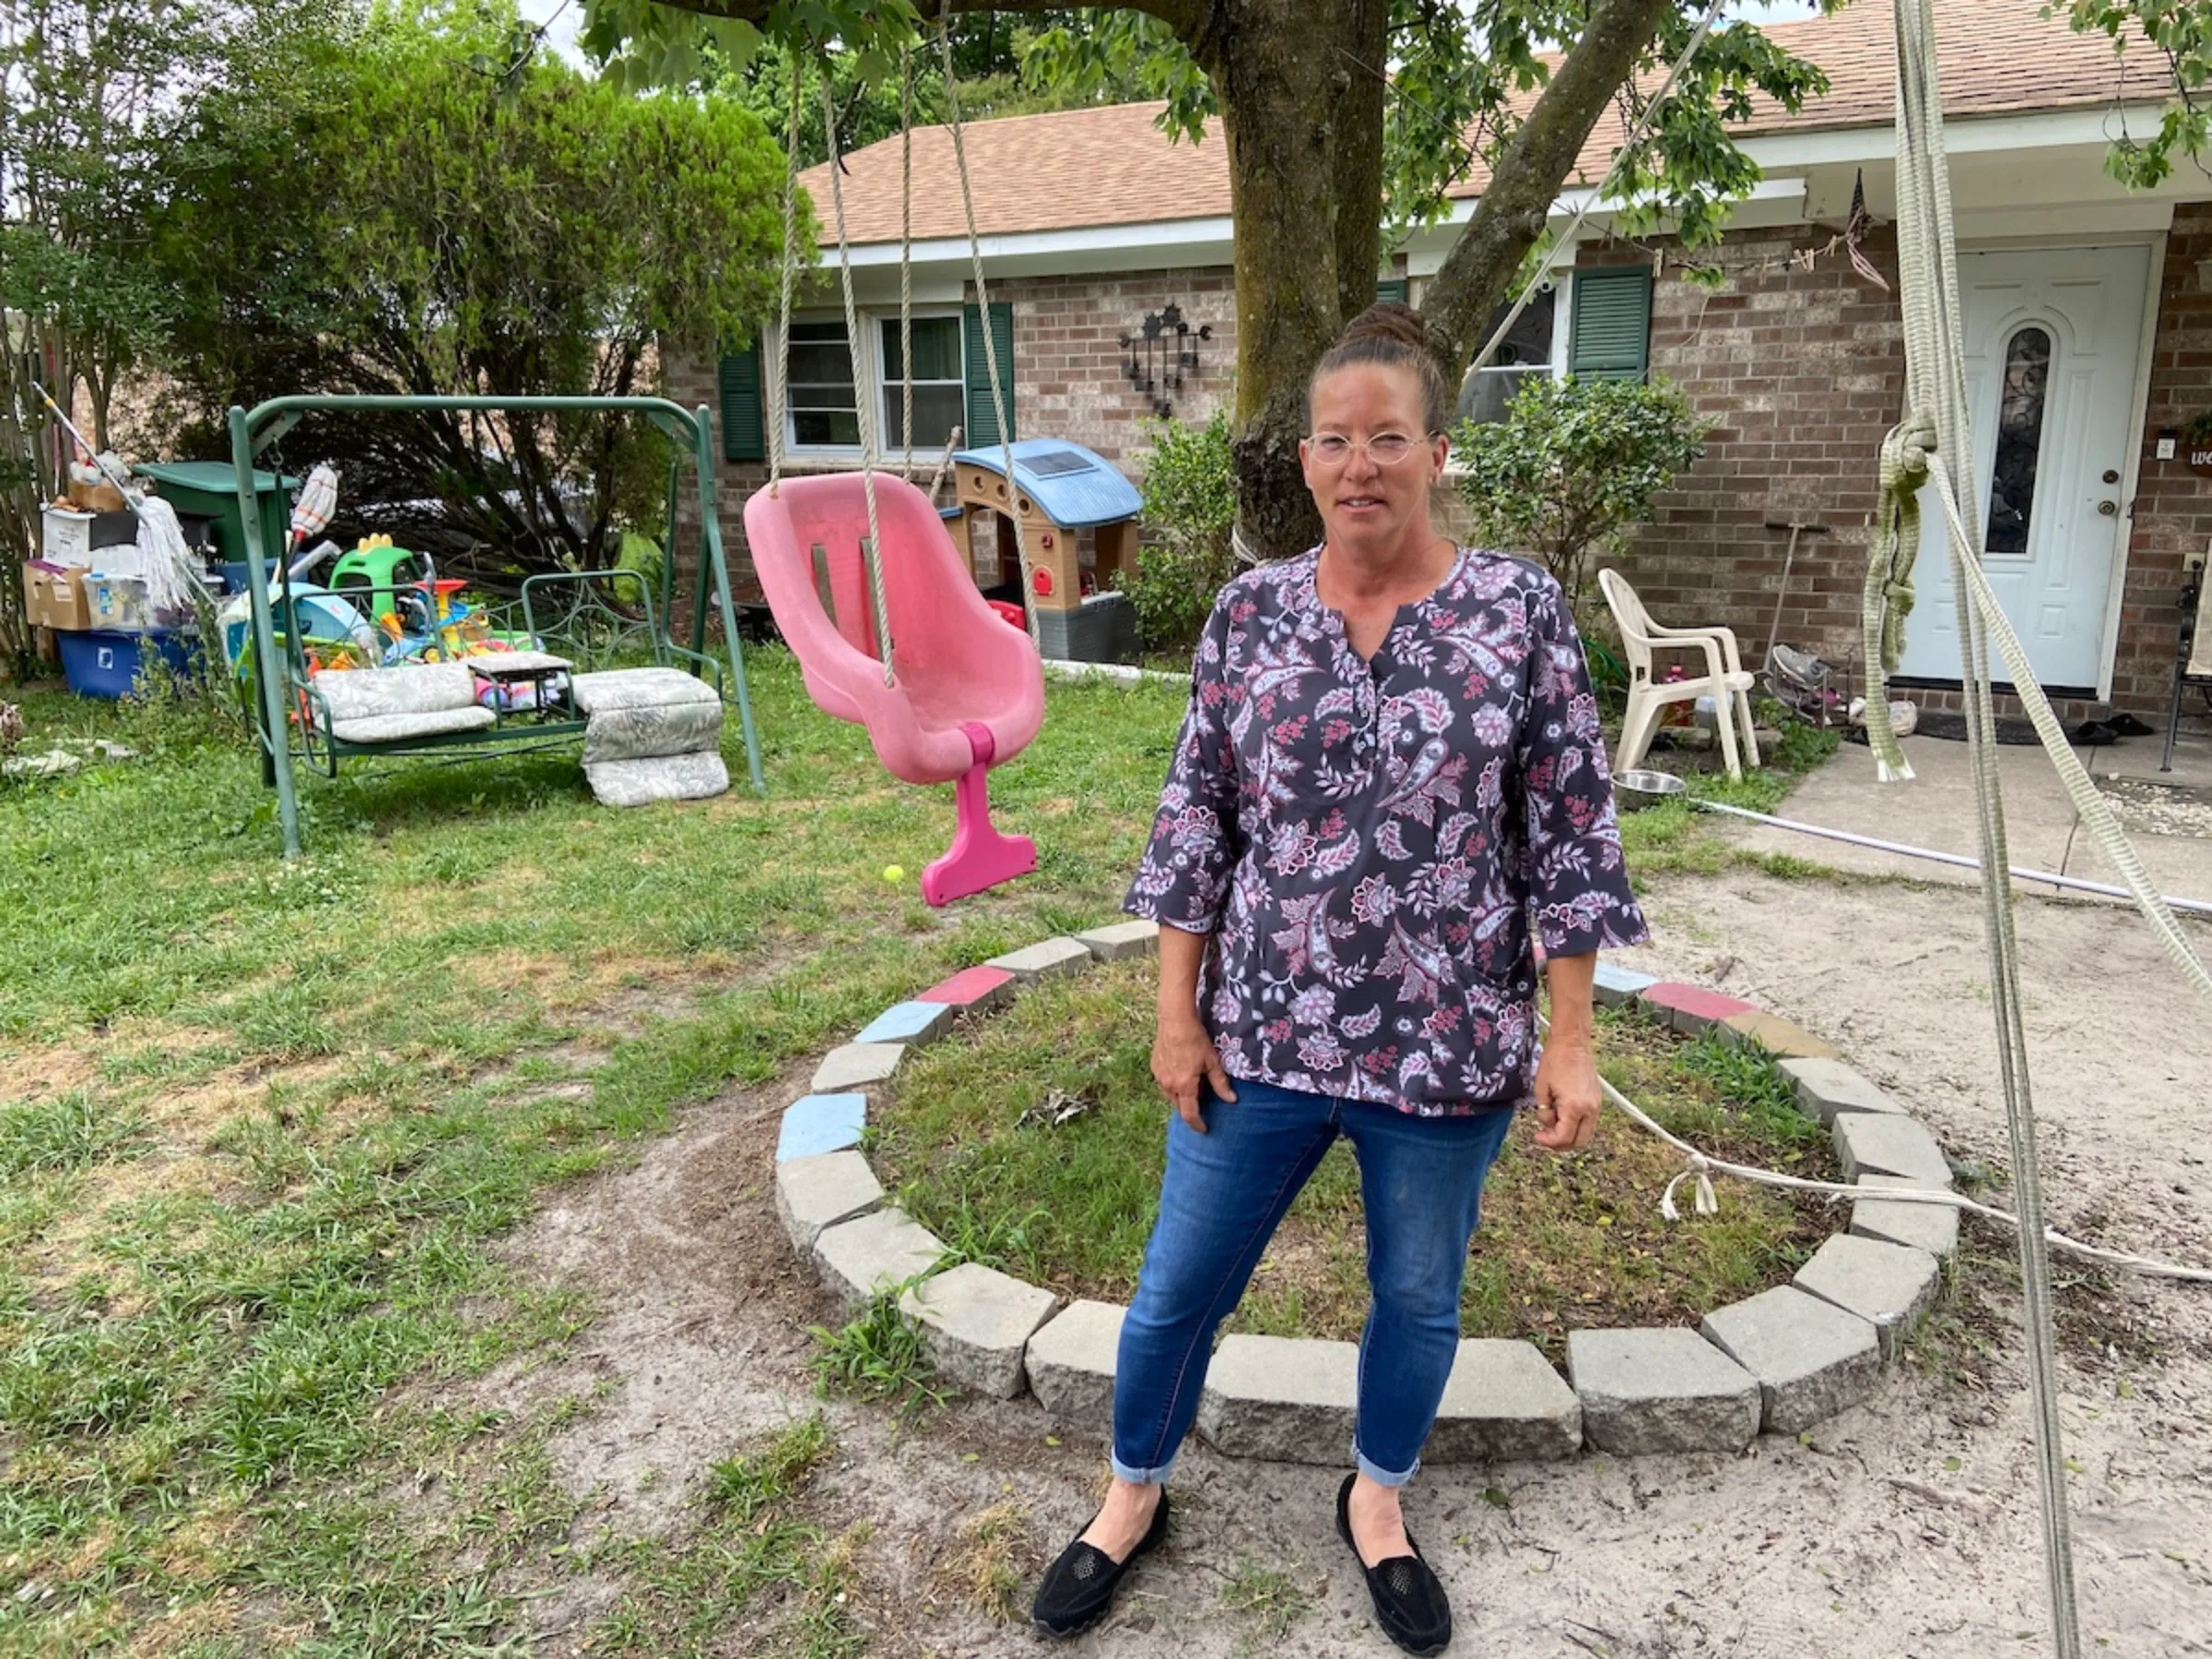 Terri Straka is pictured in front of her home in Socastee, South Carolina, USA on Sunday, May 8, 2022. Thomson Reuters Foundation/David Sherfinski